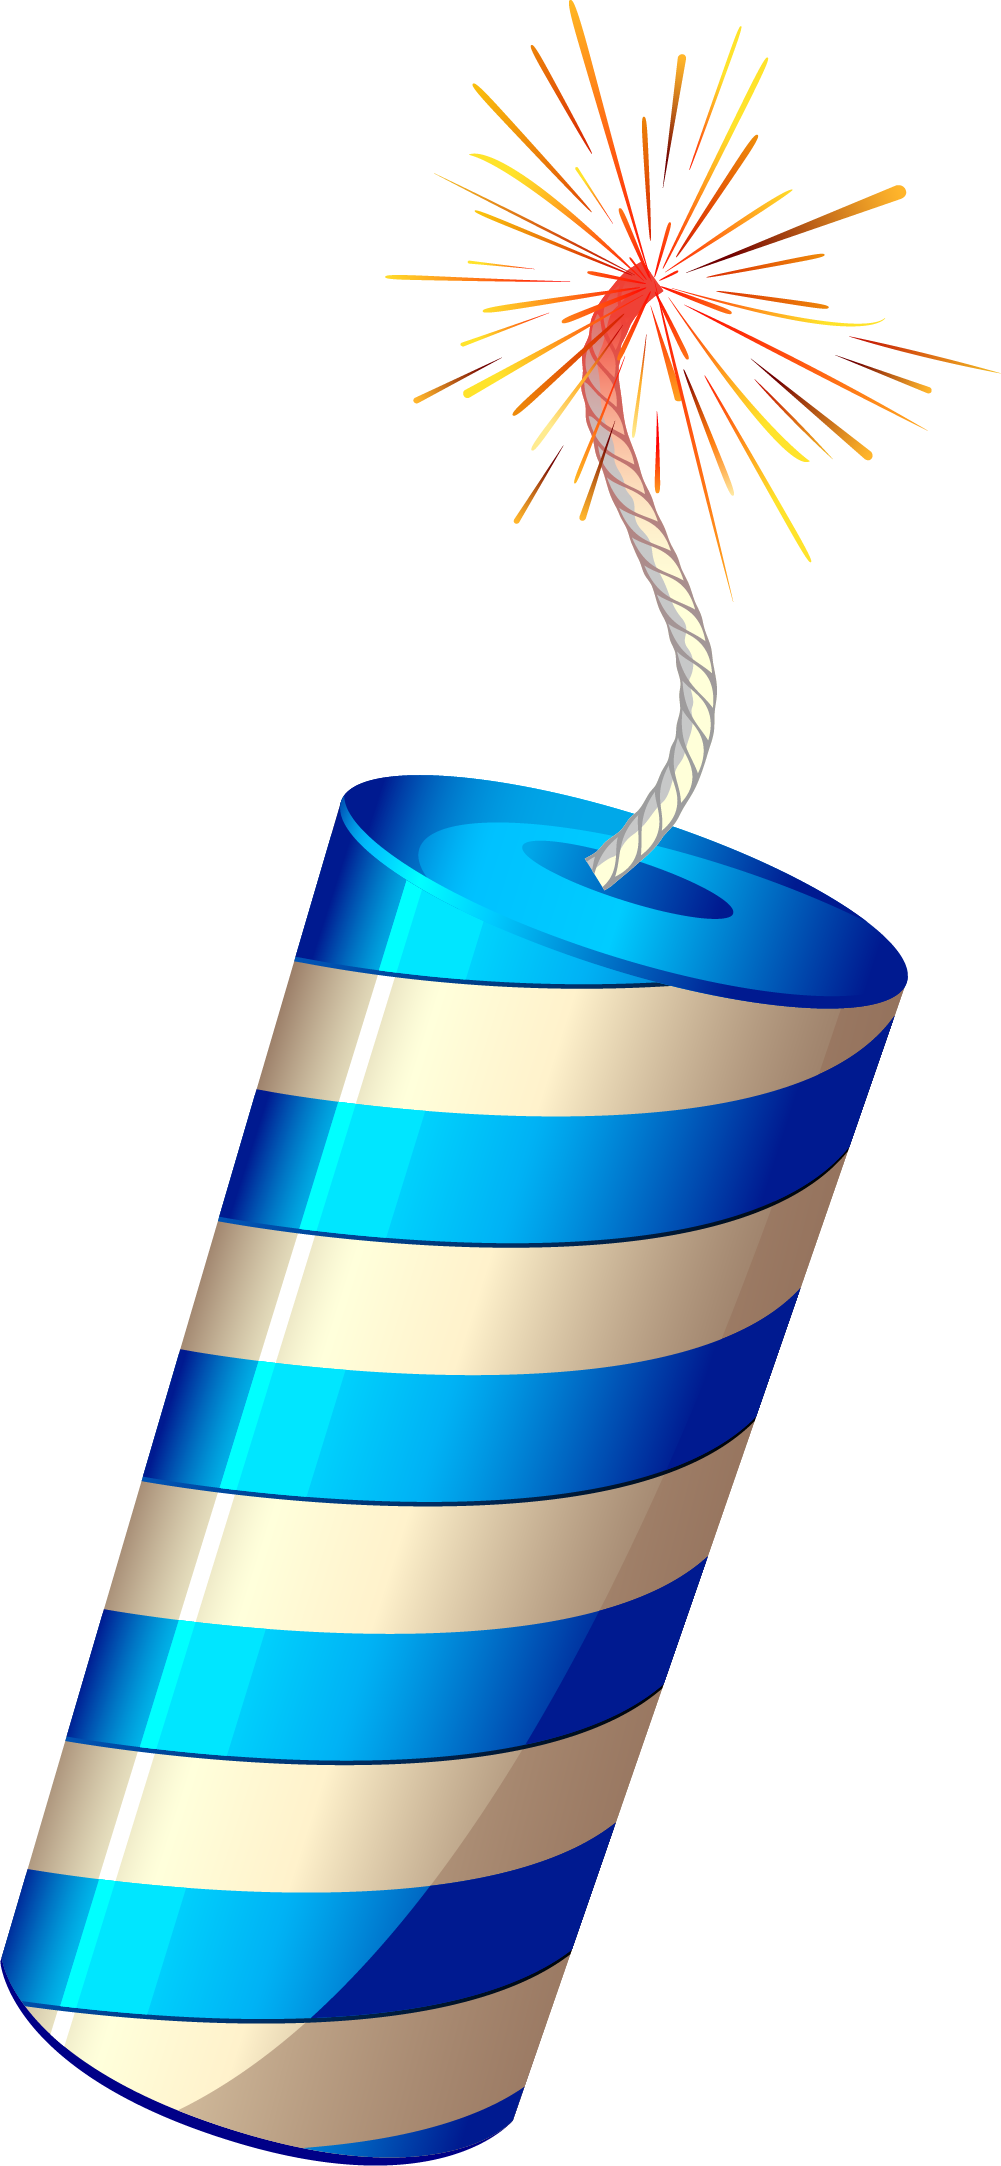 A Blue And White Striped Object With A Rope